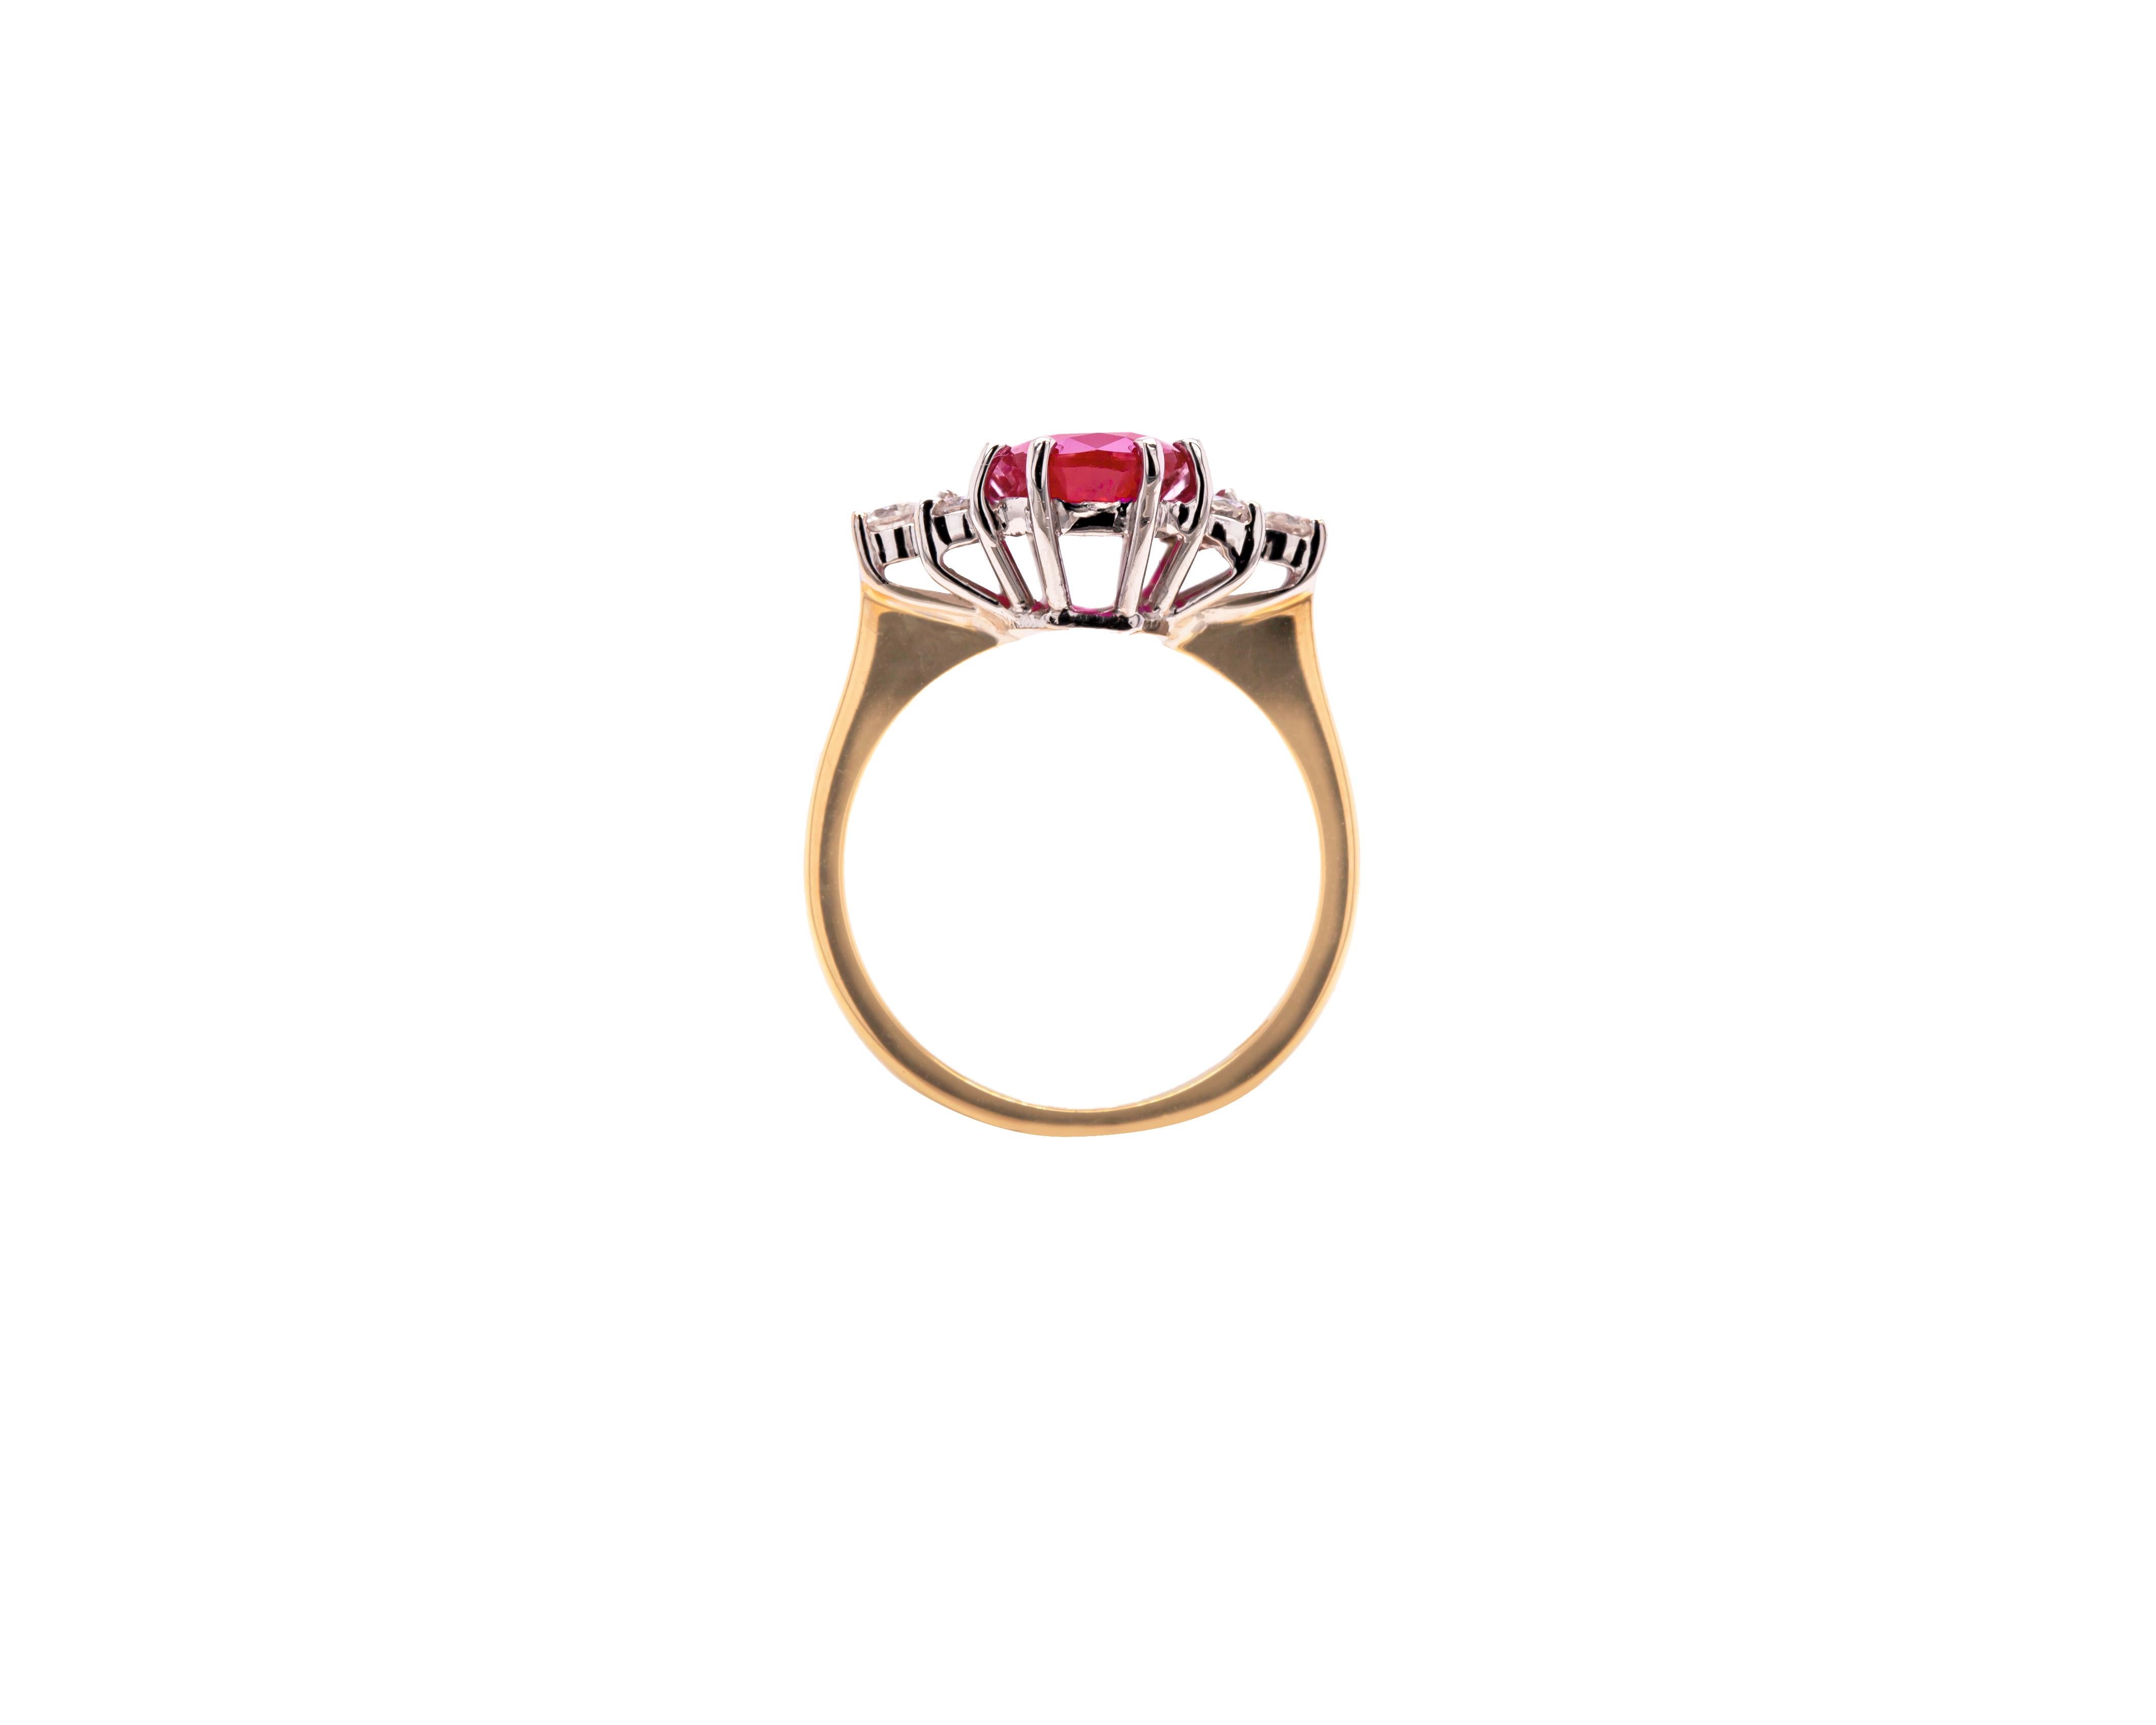 This gorgeous engagement ring is beautifully centered with 3.31ct vibrant red oval shaped ruby mounted in an eight claw, open back setting. The wonderful ruby is accompanied by 3 round brilliant cut diamonds on either side weighing approximately